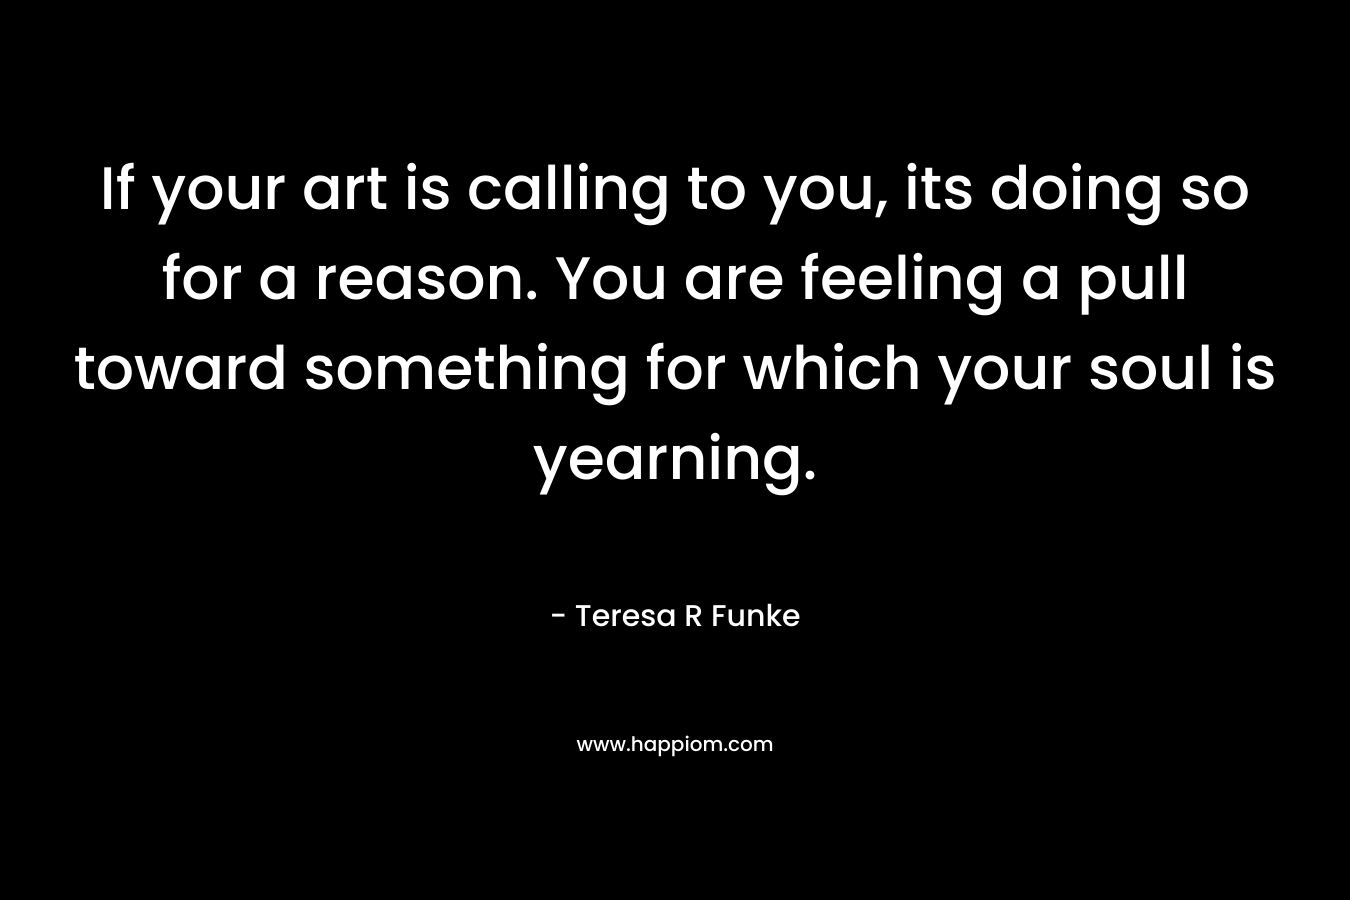 If your art is calling to you, its doing so for a reason. You are feeling a pull toward something for which your soul is yearning.